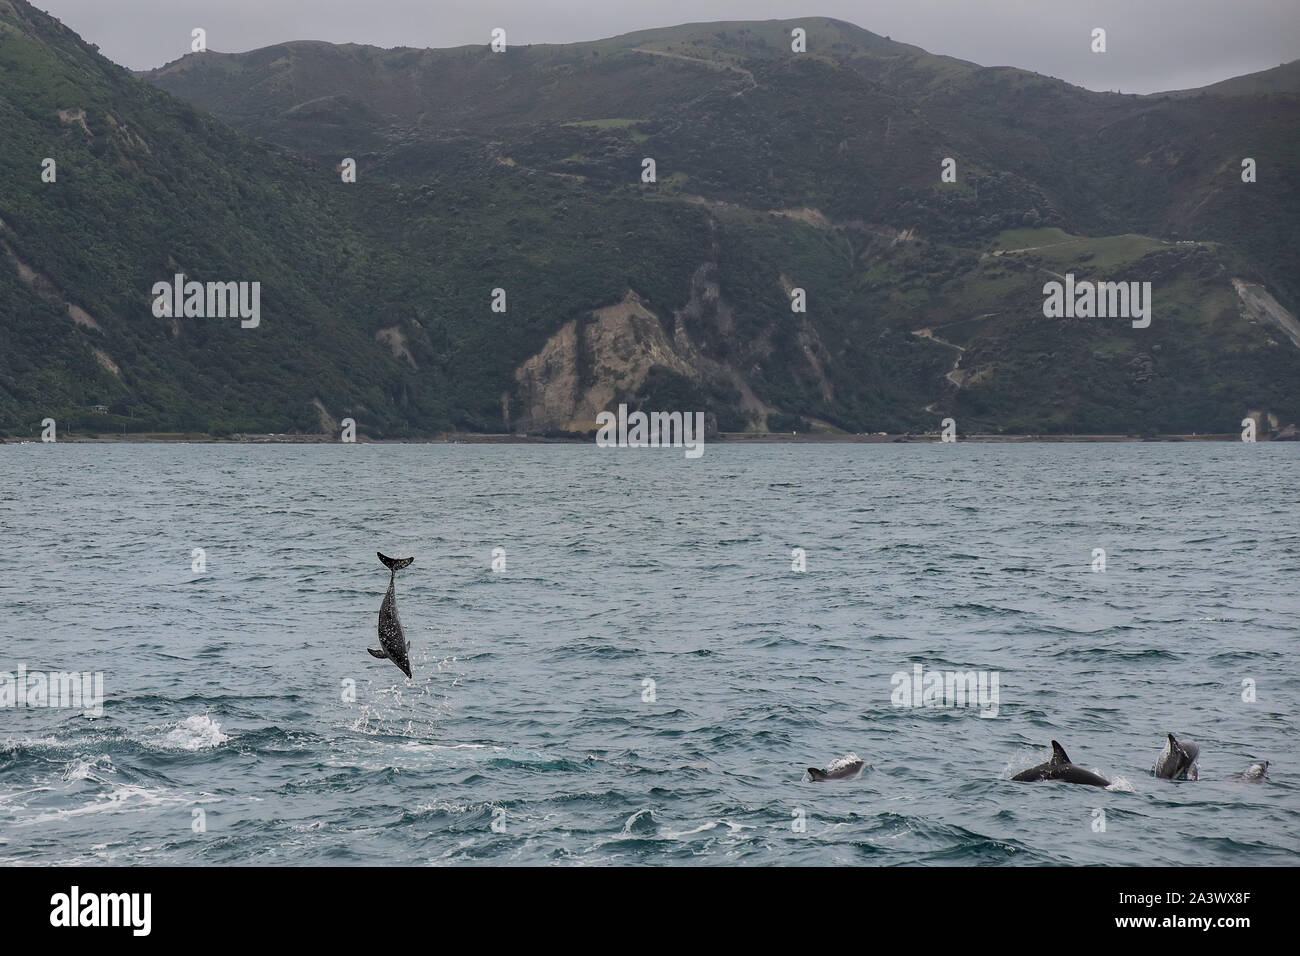 Dusky dolphins swimming off the coast of Kaikoura, New Zealand. Kaikoura is a popular tourist destination for watching and swimming with dolphins. Stock Photo